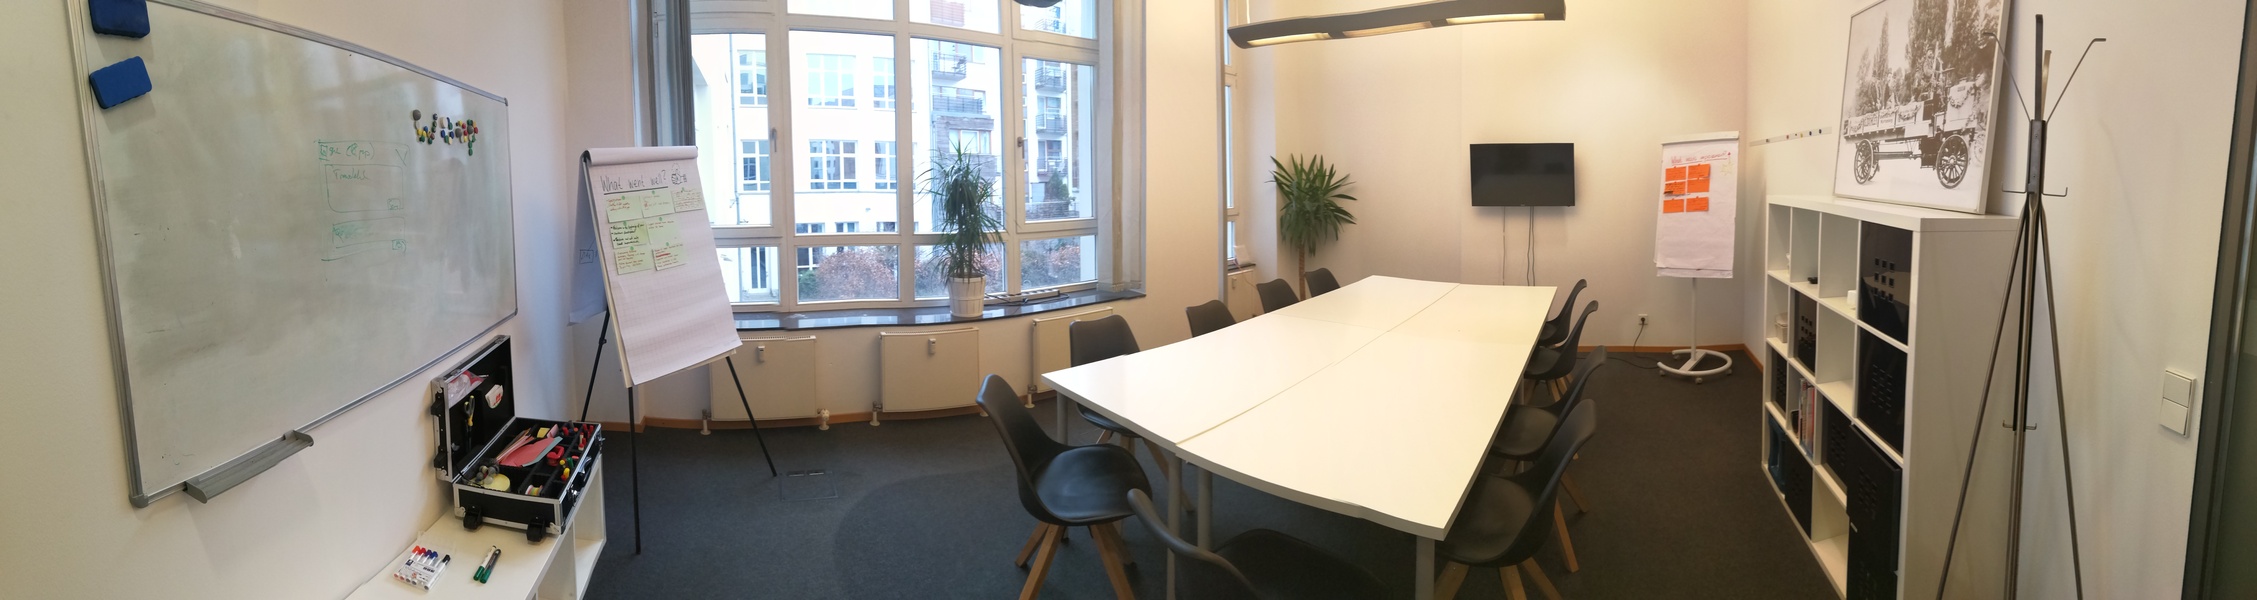 Office Sharing incl. Sunterrace in Mitte